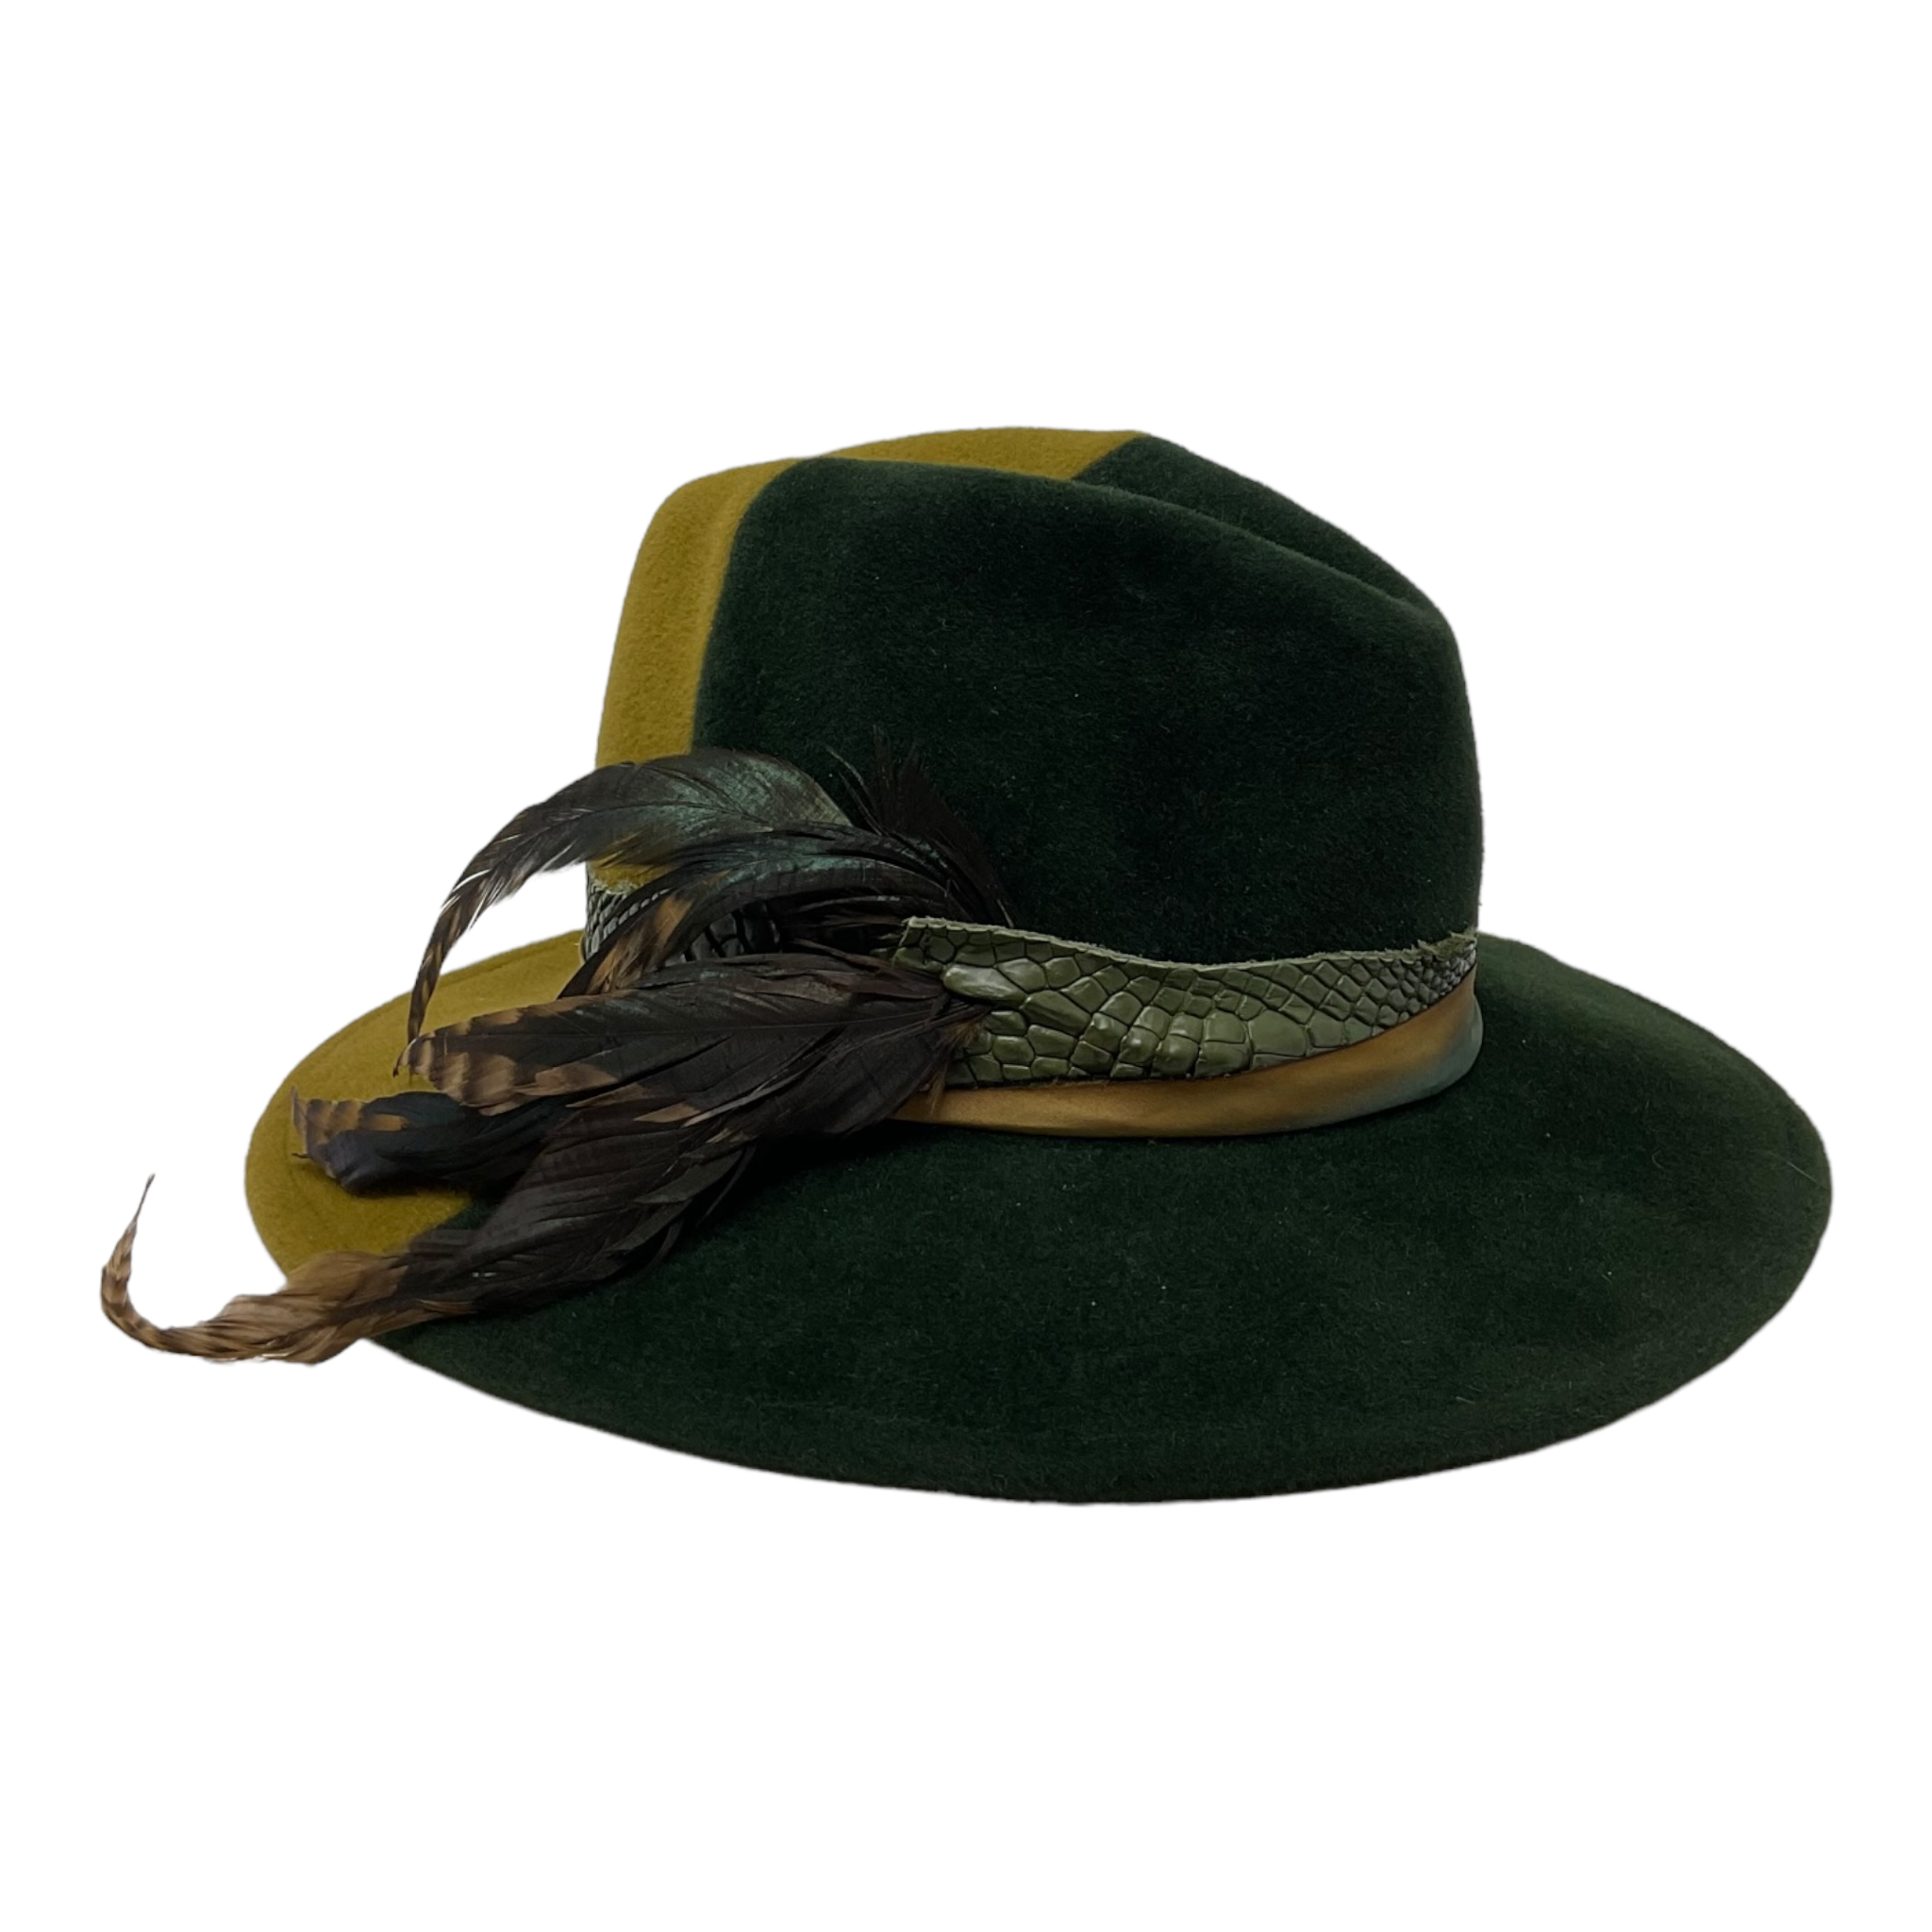 Two Toned Fedora - Moss Green and Olive